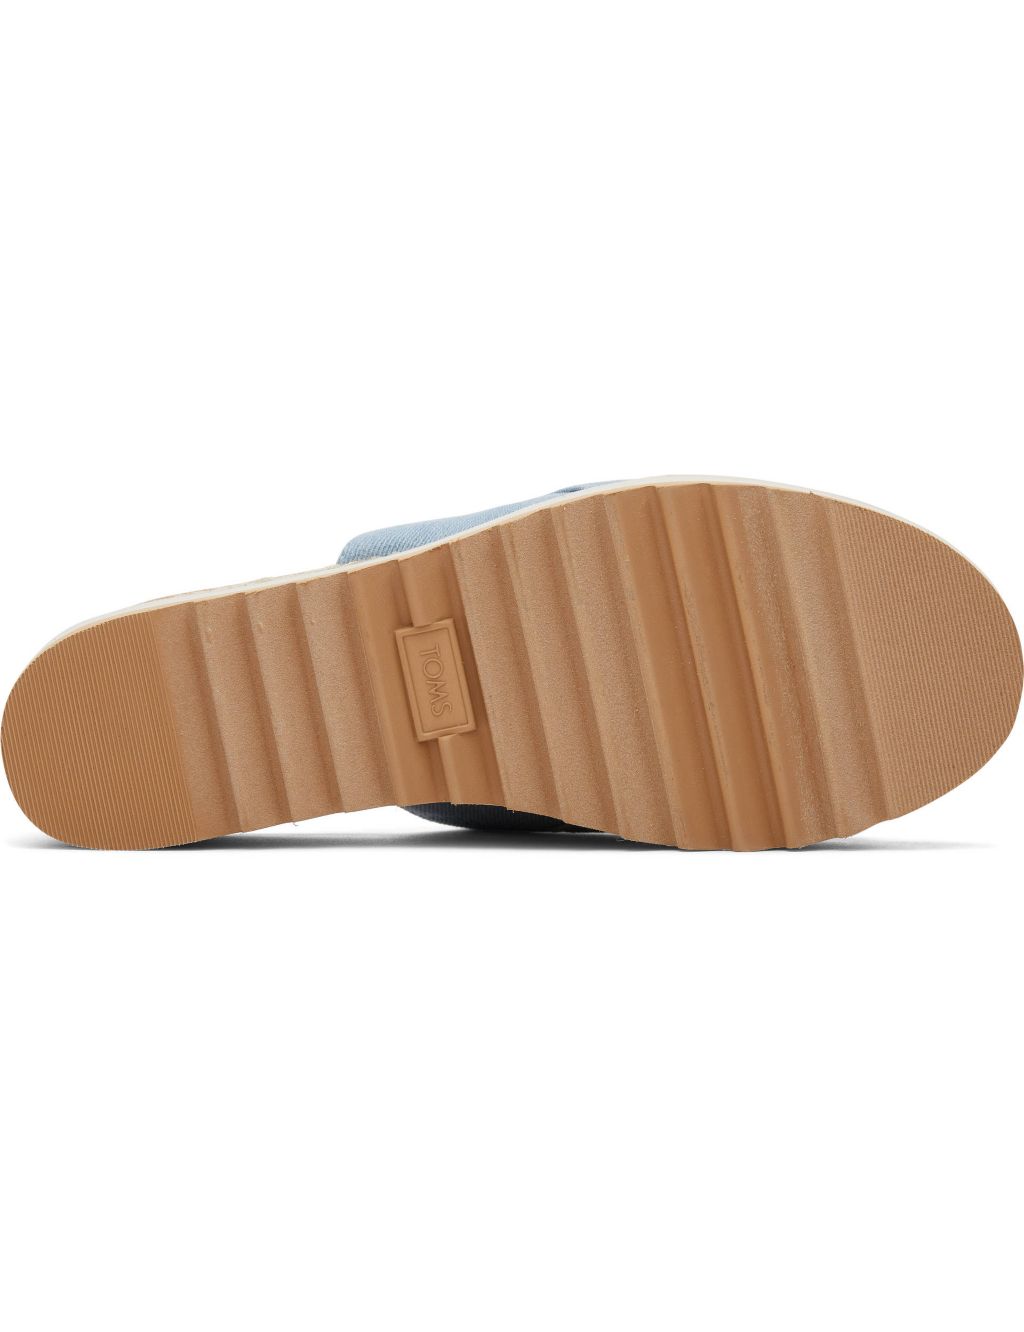 Canvas Wedge Mules image 6